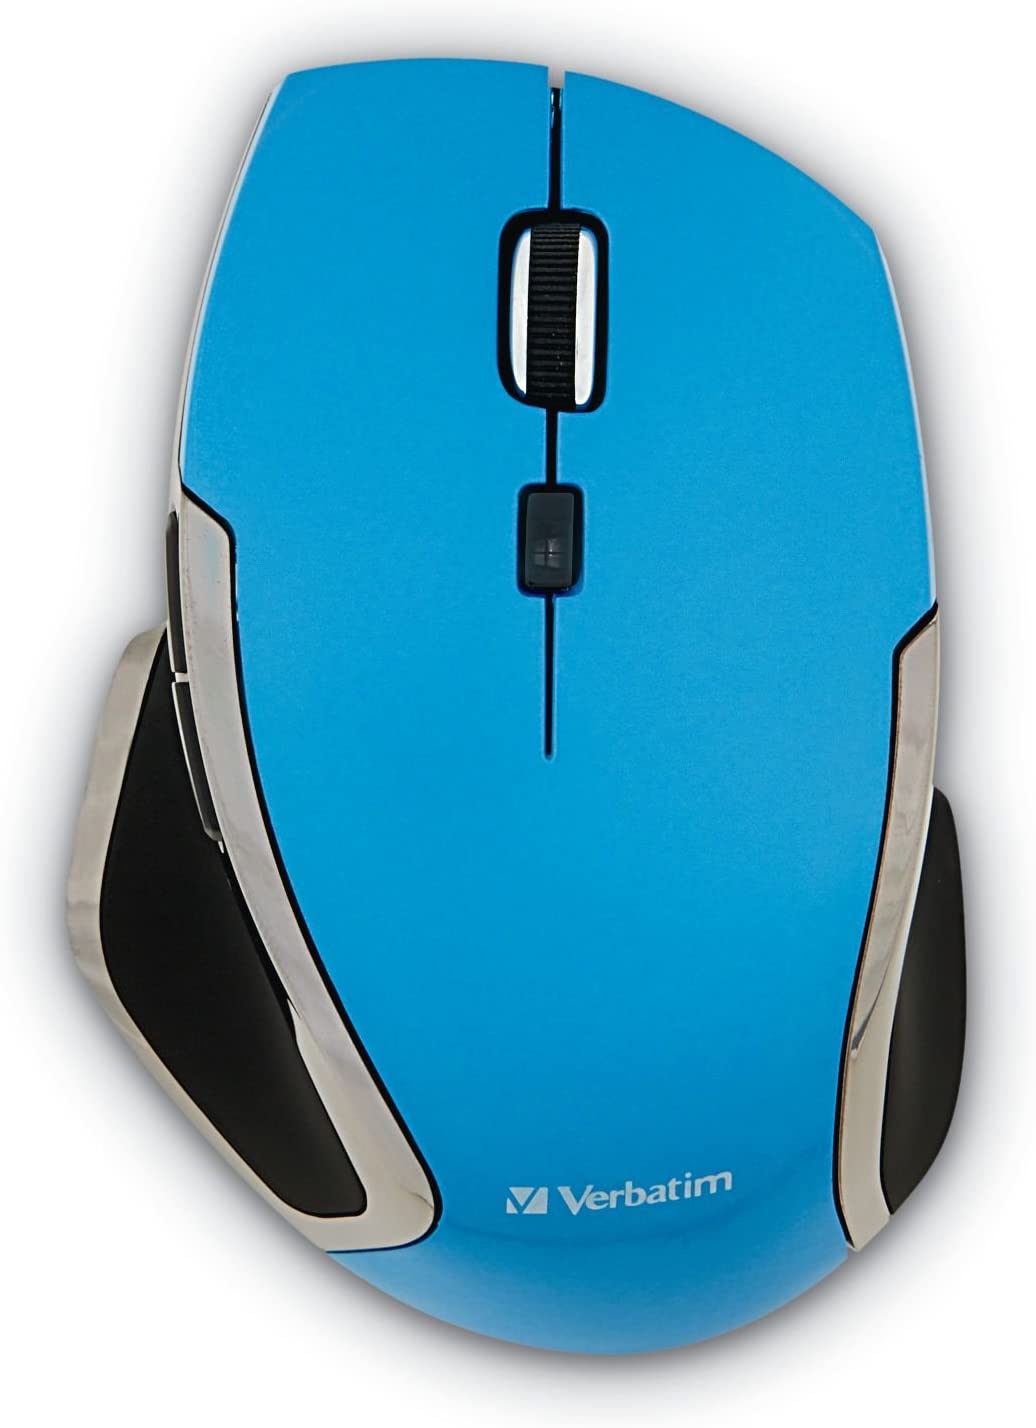 Verbatim 2.4G Wireless 6-Button LED Ergonomic Deluxe Mouse - Computer Mouse with Nano Receiver for Mac and PC – Blue